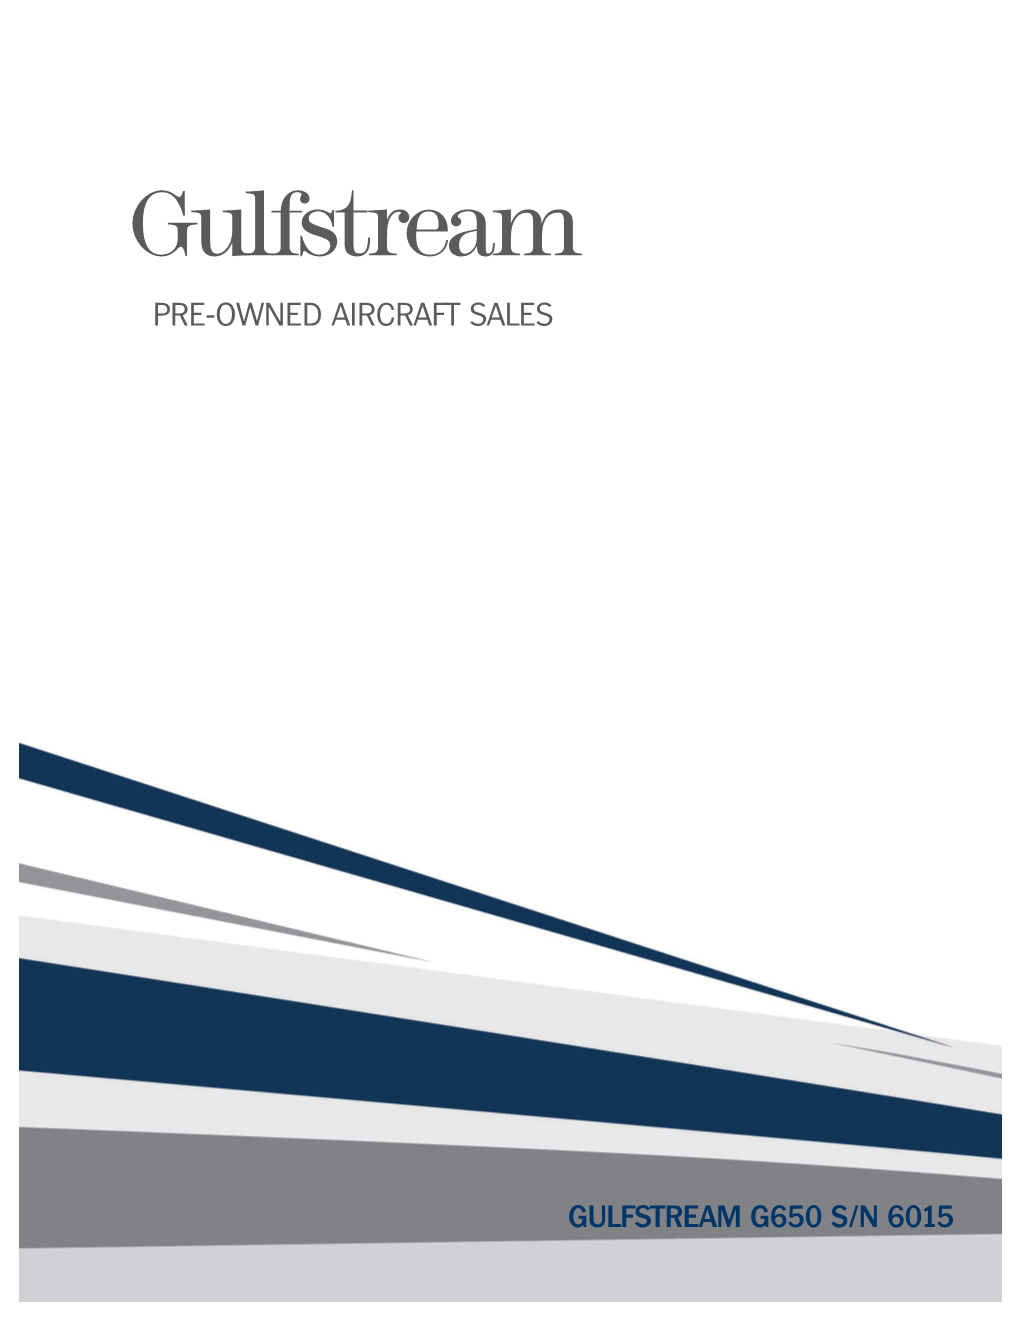 Pre-Owned Aircraft Sales